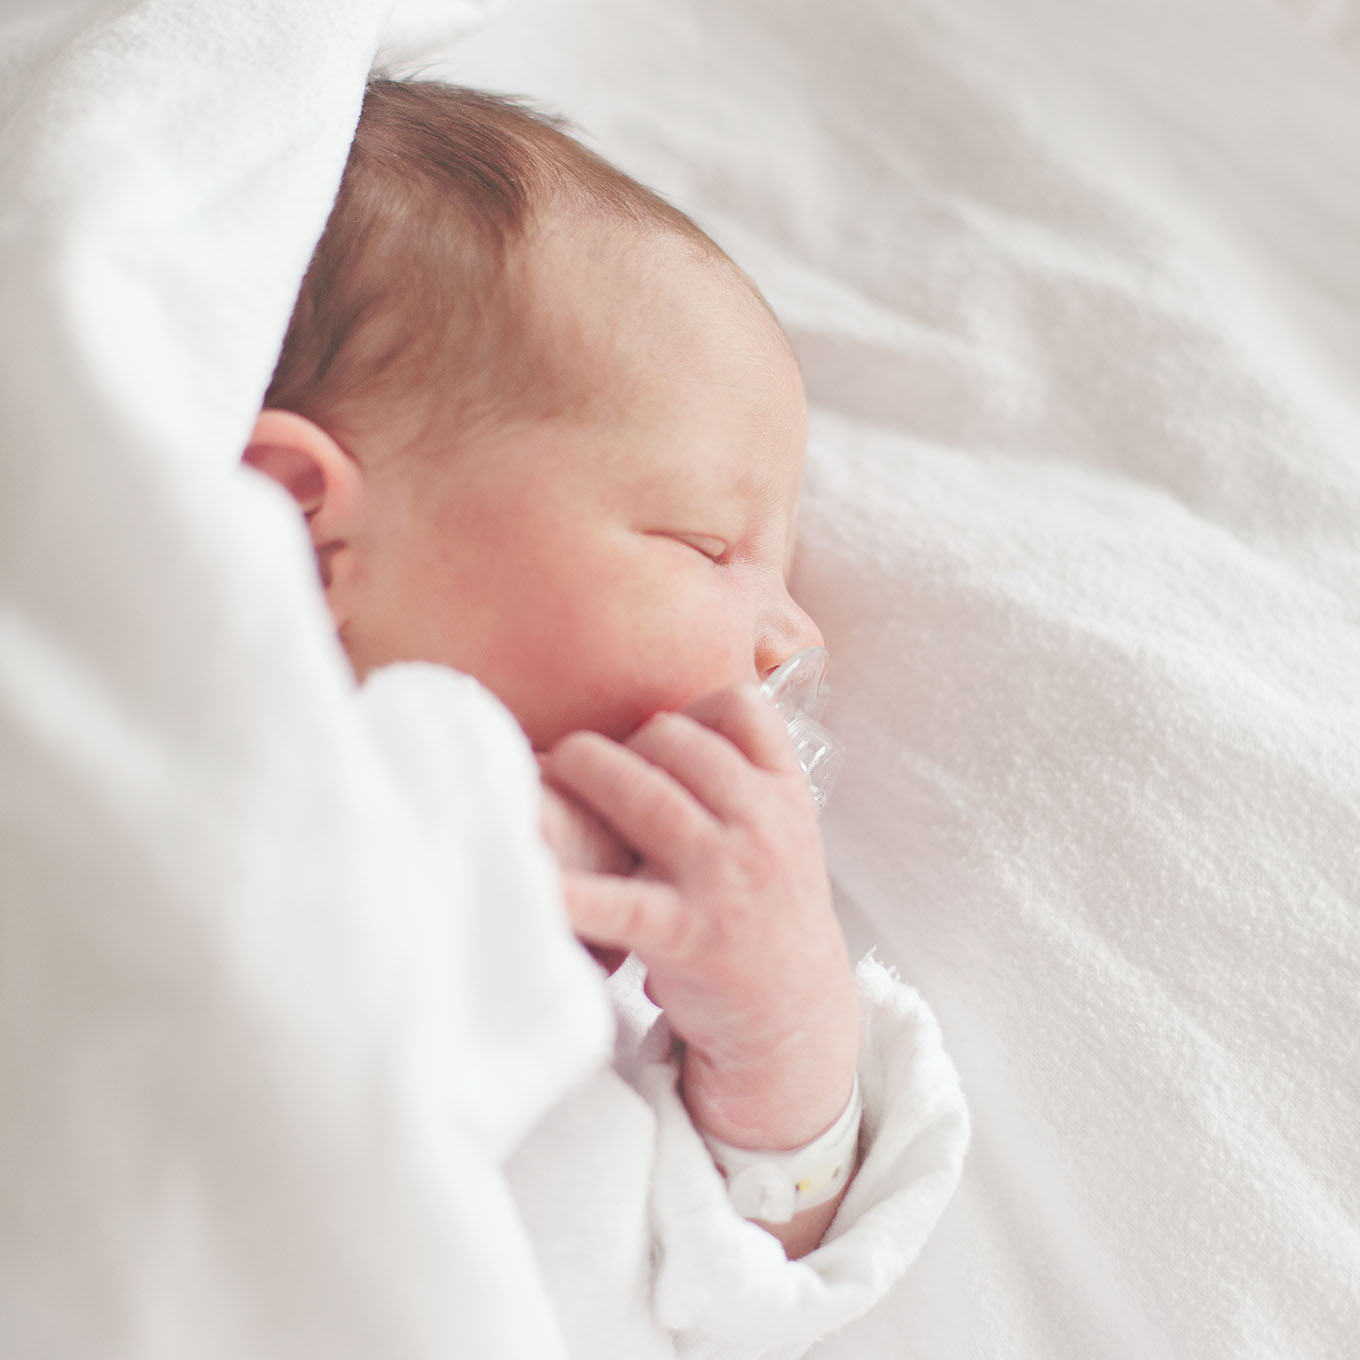 Your baby is so fresh and innocent—and this stage so fleeting. Here's how to improve your newborn photography while you still have a newborn in your arms.